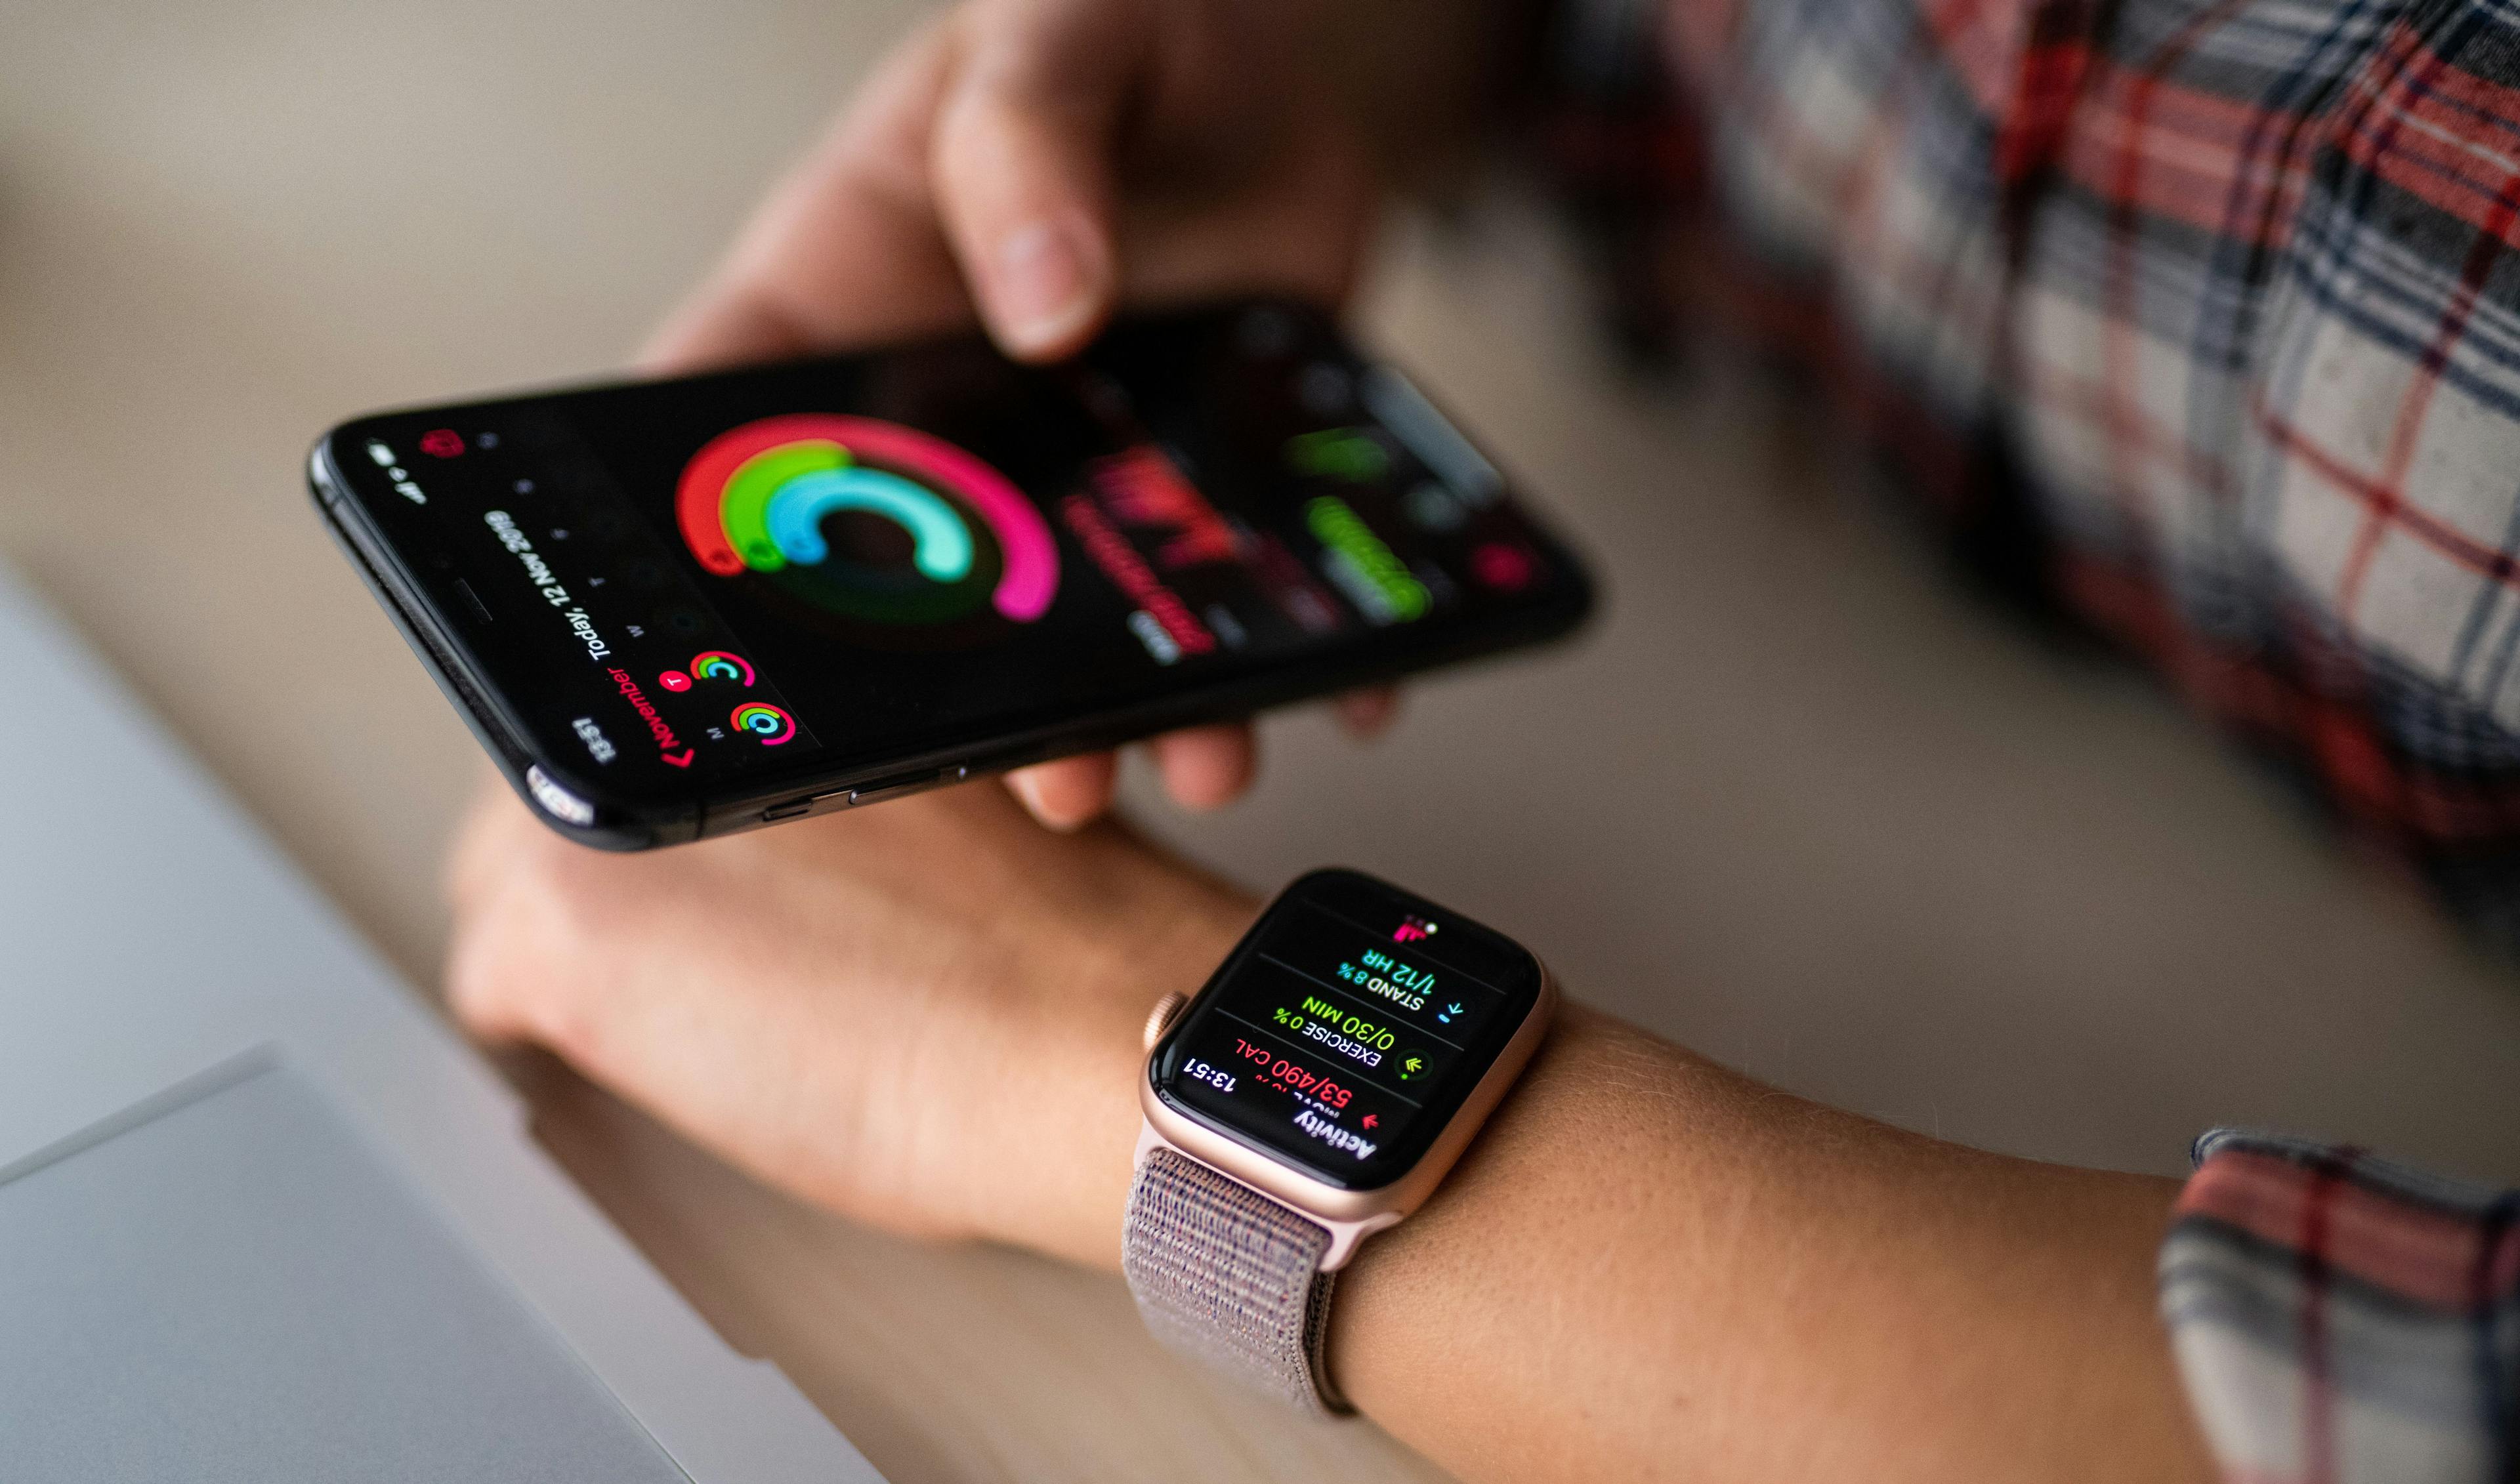 Patients are growing more trusting of wearable medical devices: ©Halfpoint - stock.adobe.com